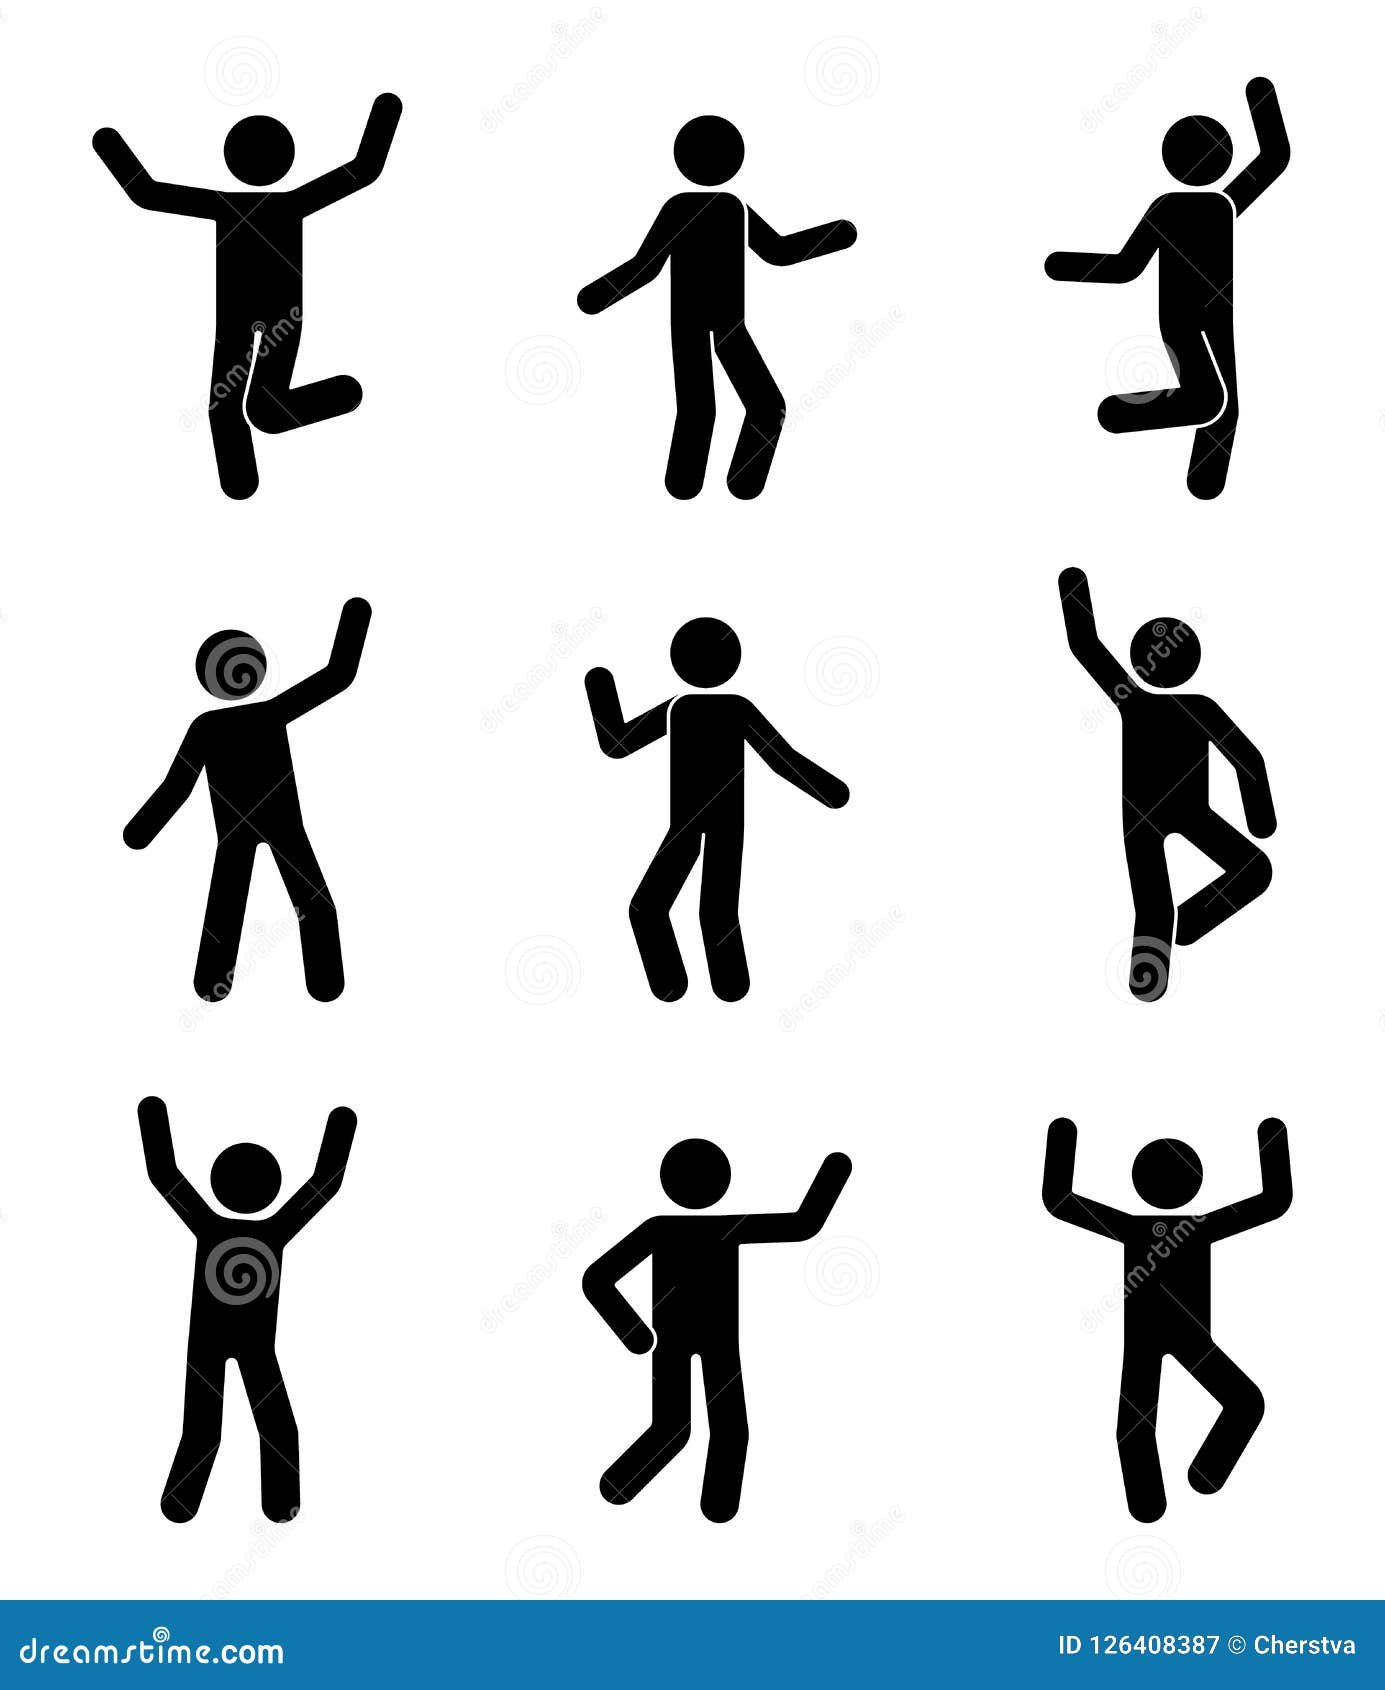 happy people stick figure icon set. man in different poses celebrating pictogram.